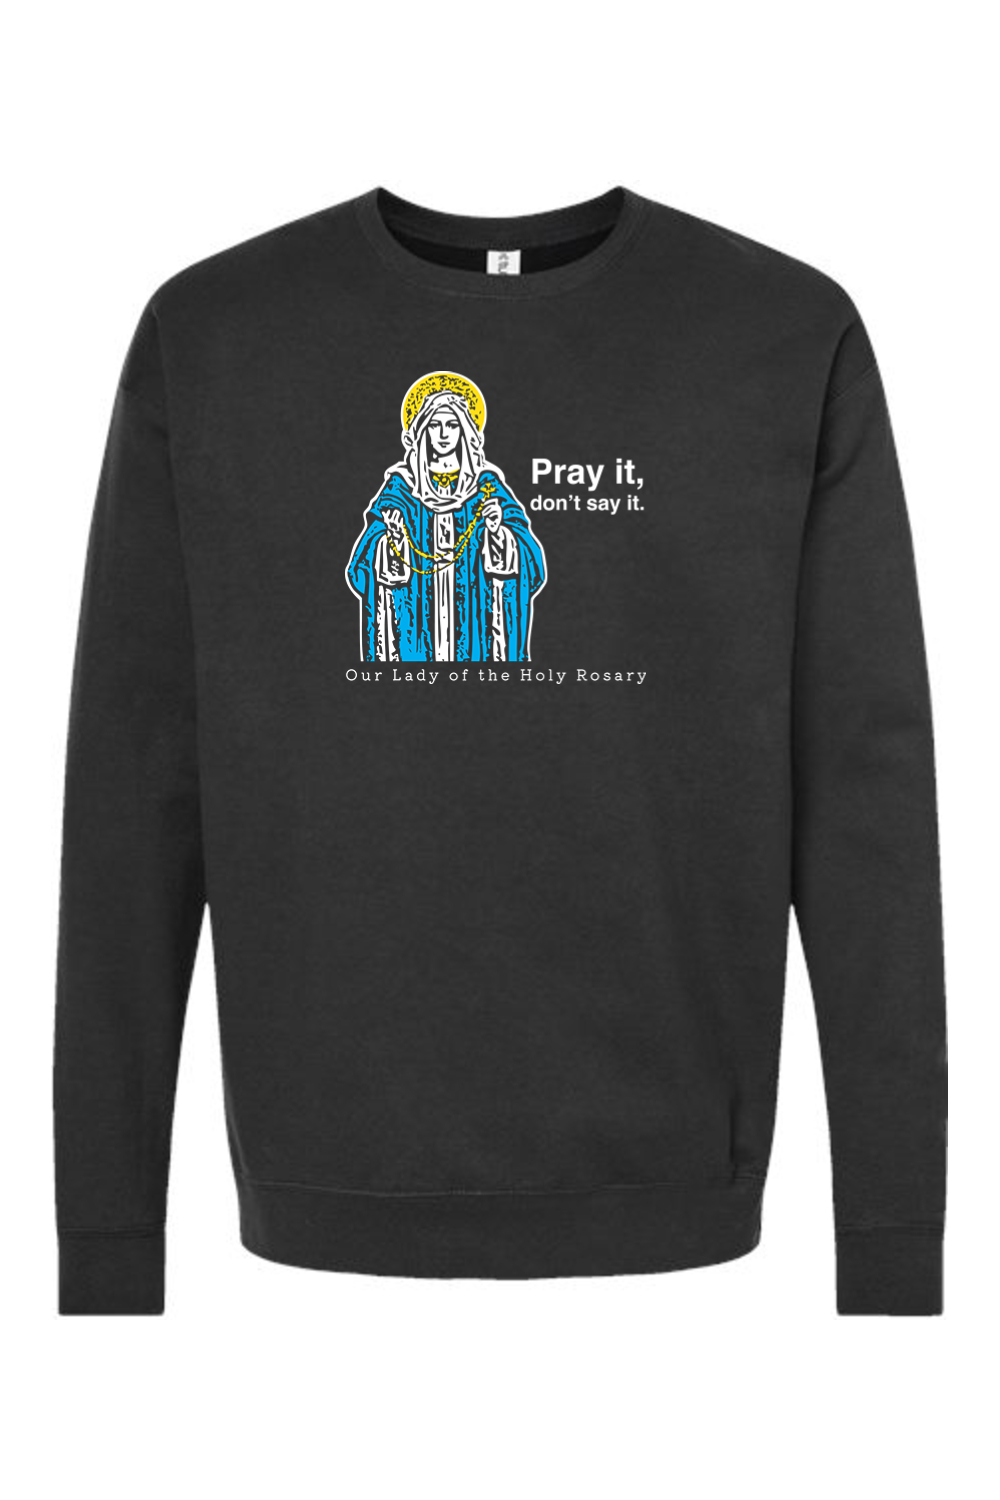 Pray It, Don't Say It - Our Lady of the Rosary Crewneck Sweatshirt